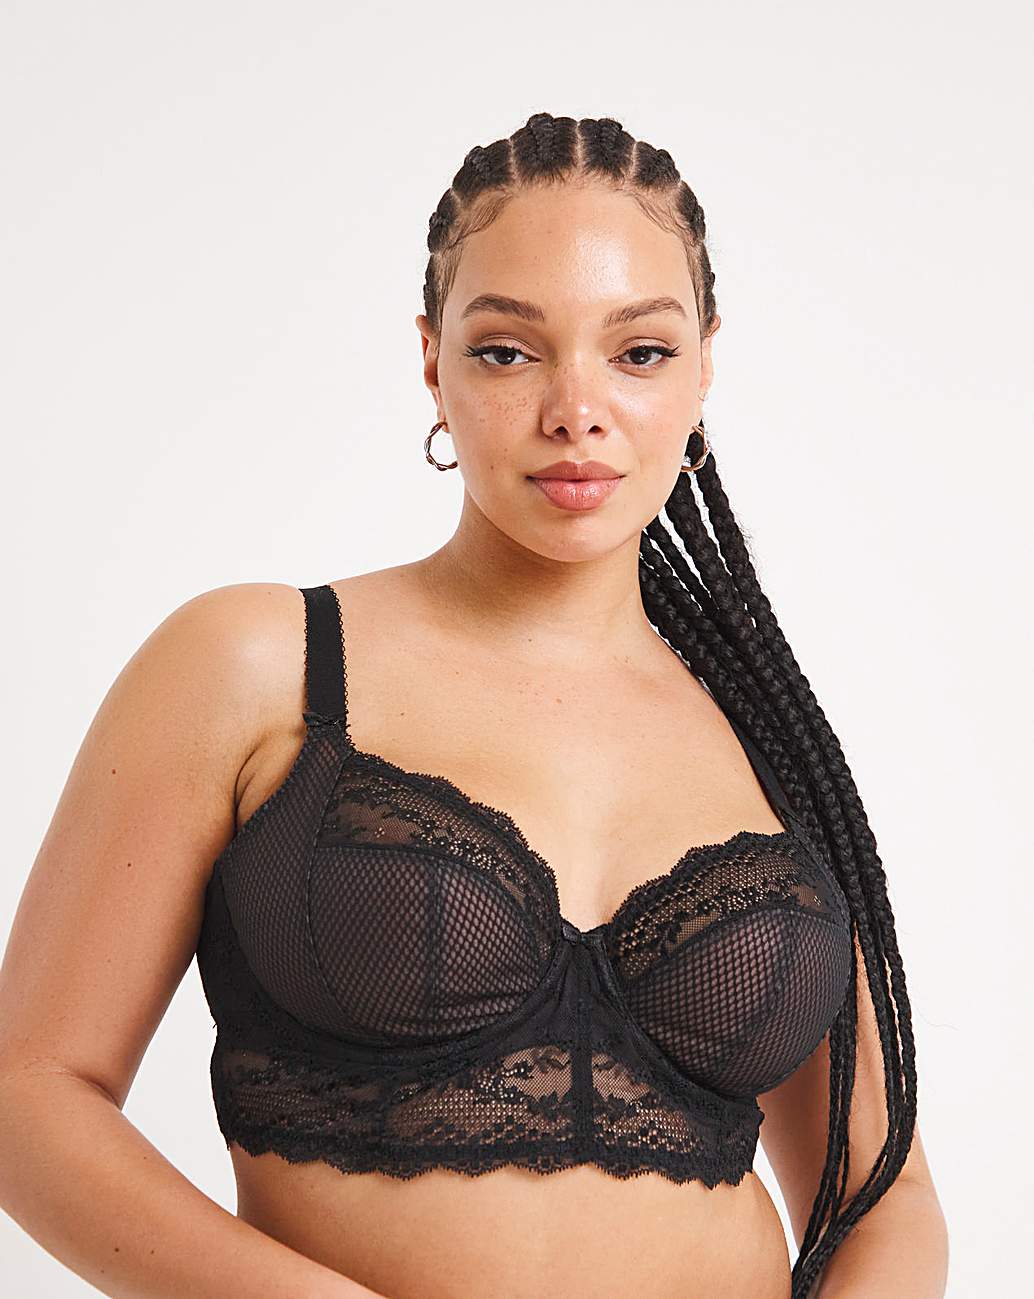 Elomi Charley Underwire Bralette Bra Review  Bra Haul with Bra Hacks  Features And Benefits 